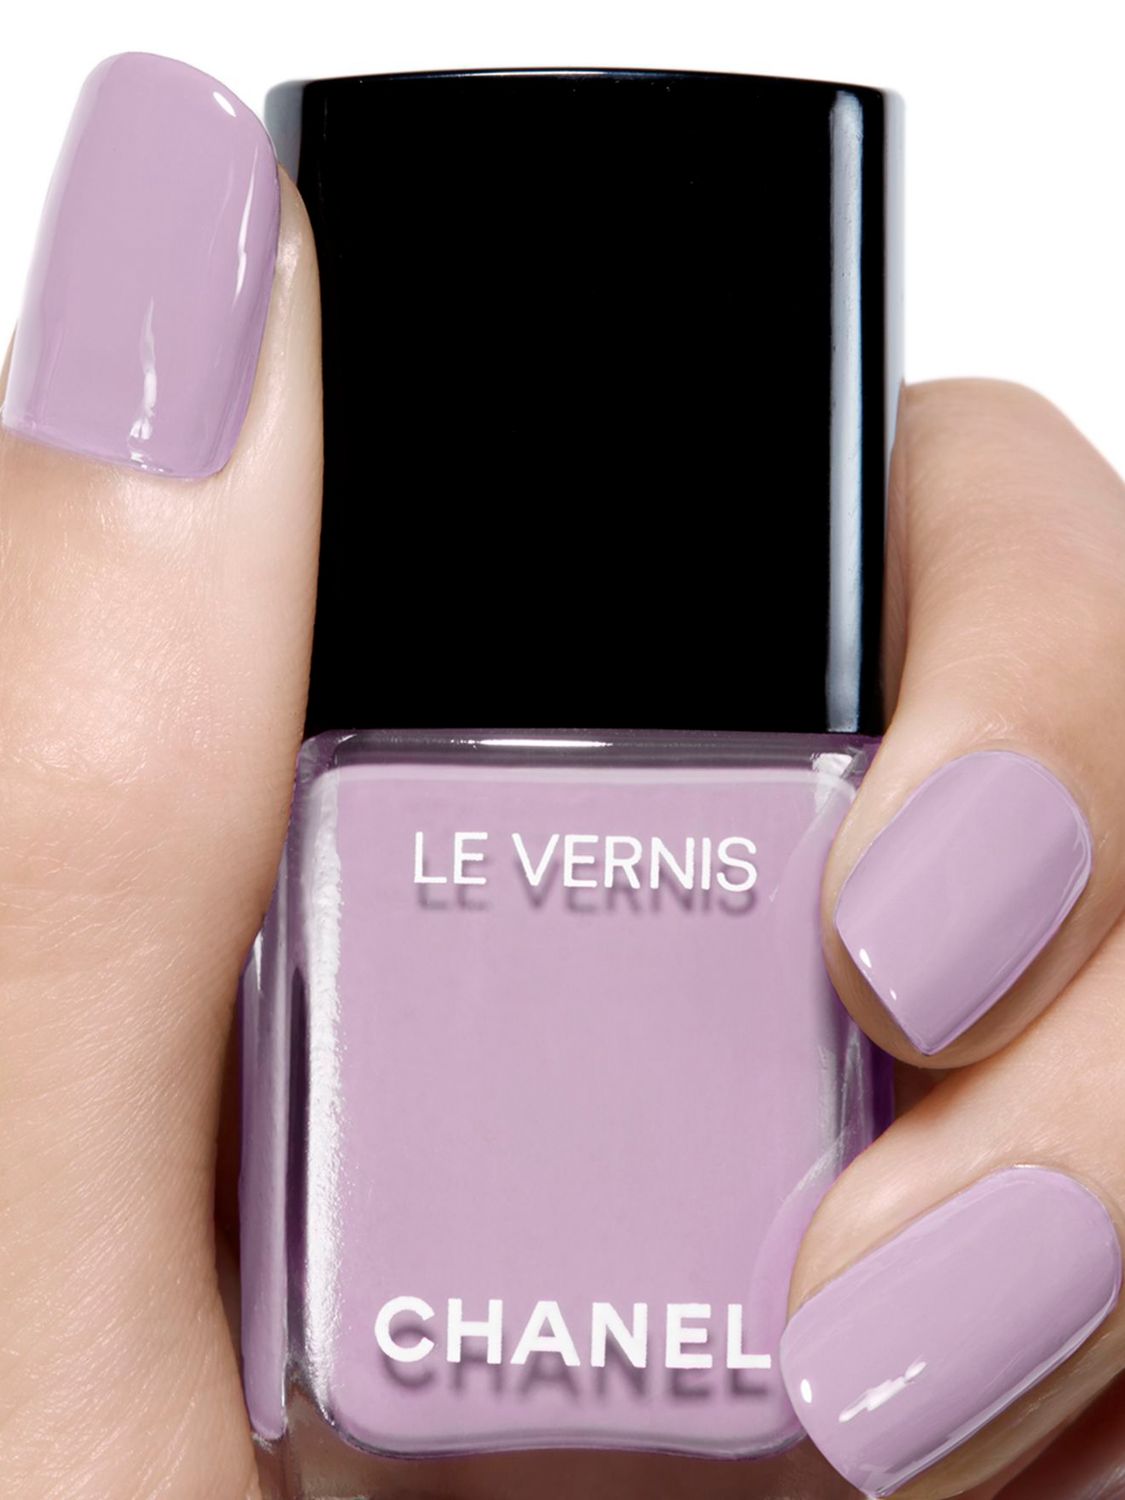 Jewels For Nail Art Ideas  Chanel nail art, Chanel nails, Luxury nails